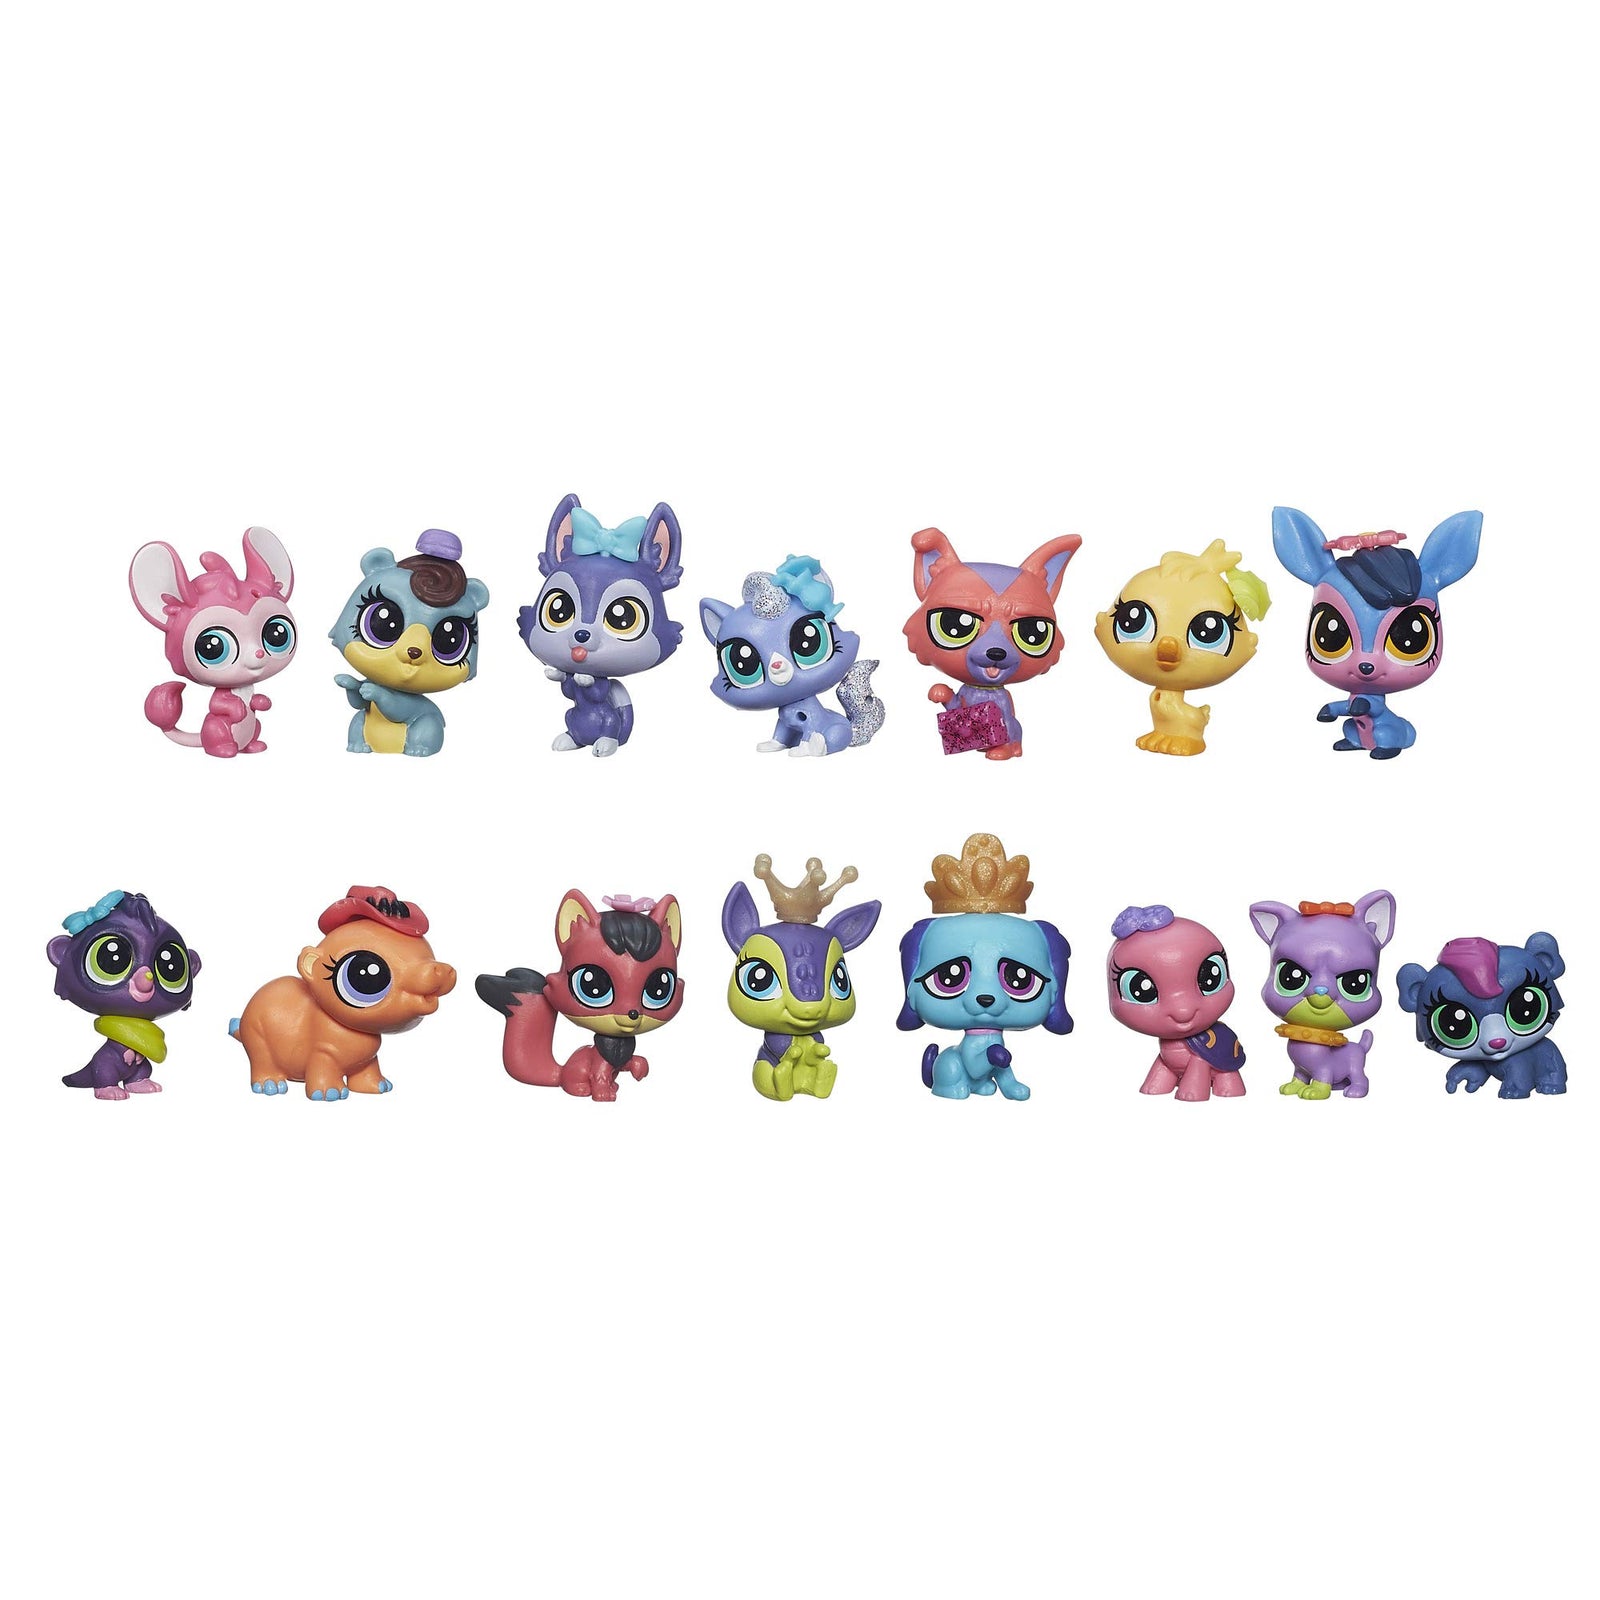 Littlest Pet Shop Pet Party Spectacular Collector Pack Toy, Includes 15 Pets, Ages 4 and Up(Amazon Exclusive) , Black